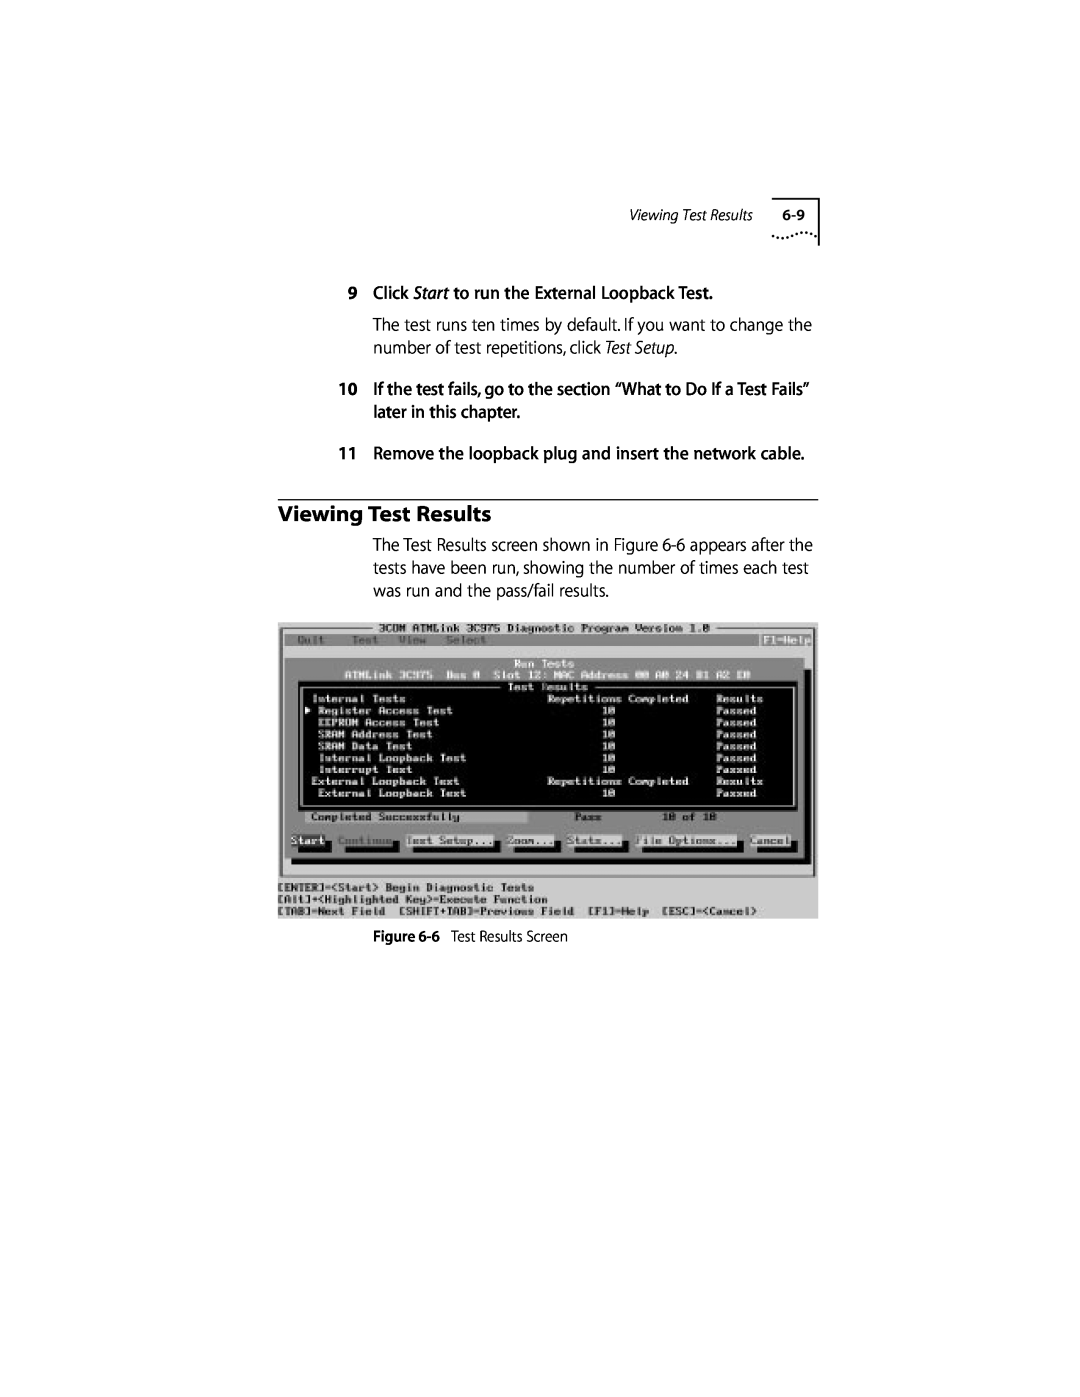 3Com 155 PCI manual Viewing Test Results, Click Start to run the External Loopback Test 